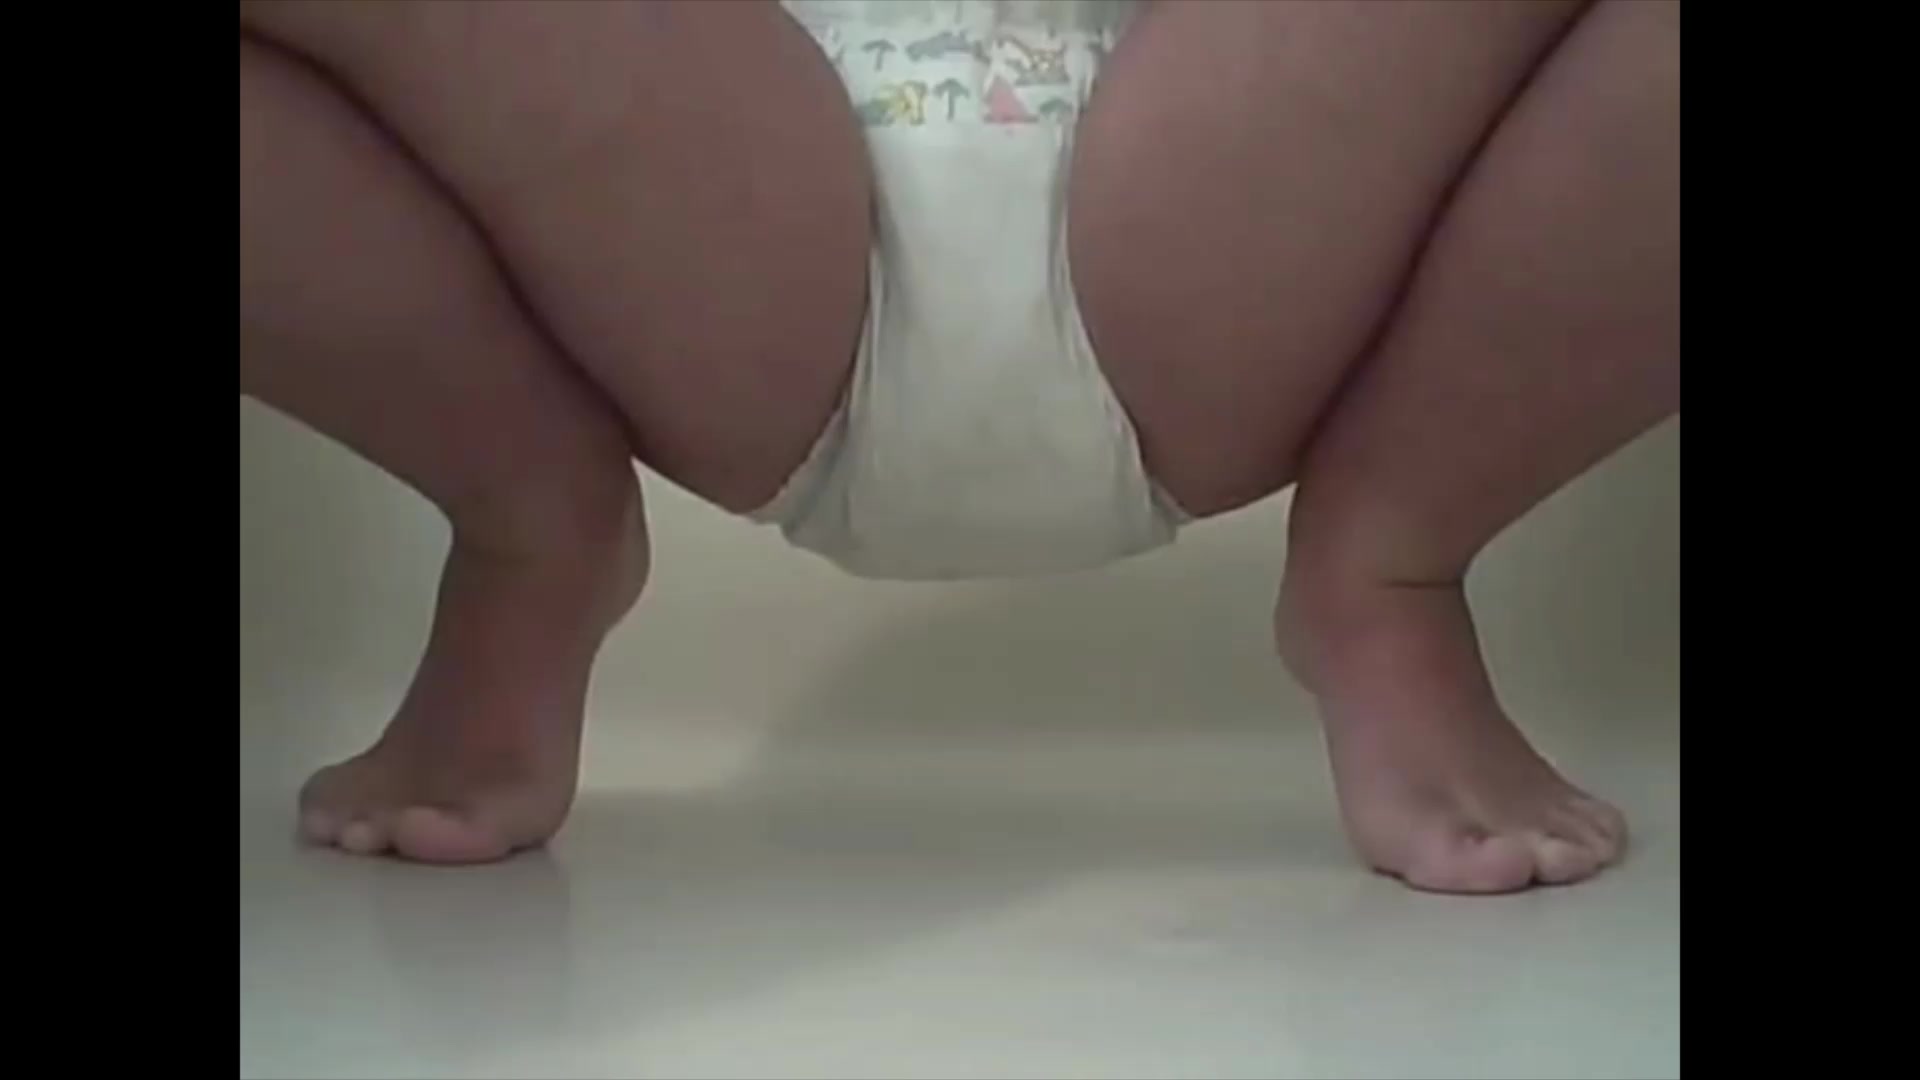 Girl Shits and Pisses Diaper and Shows Result